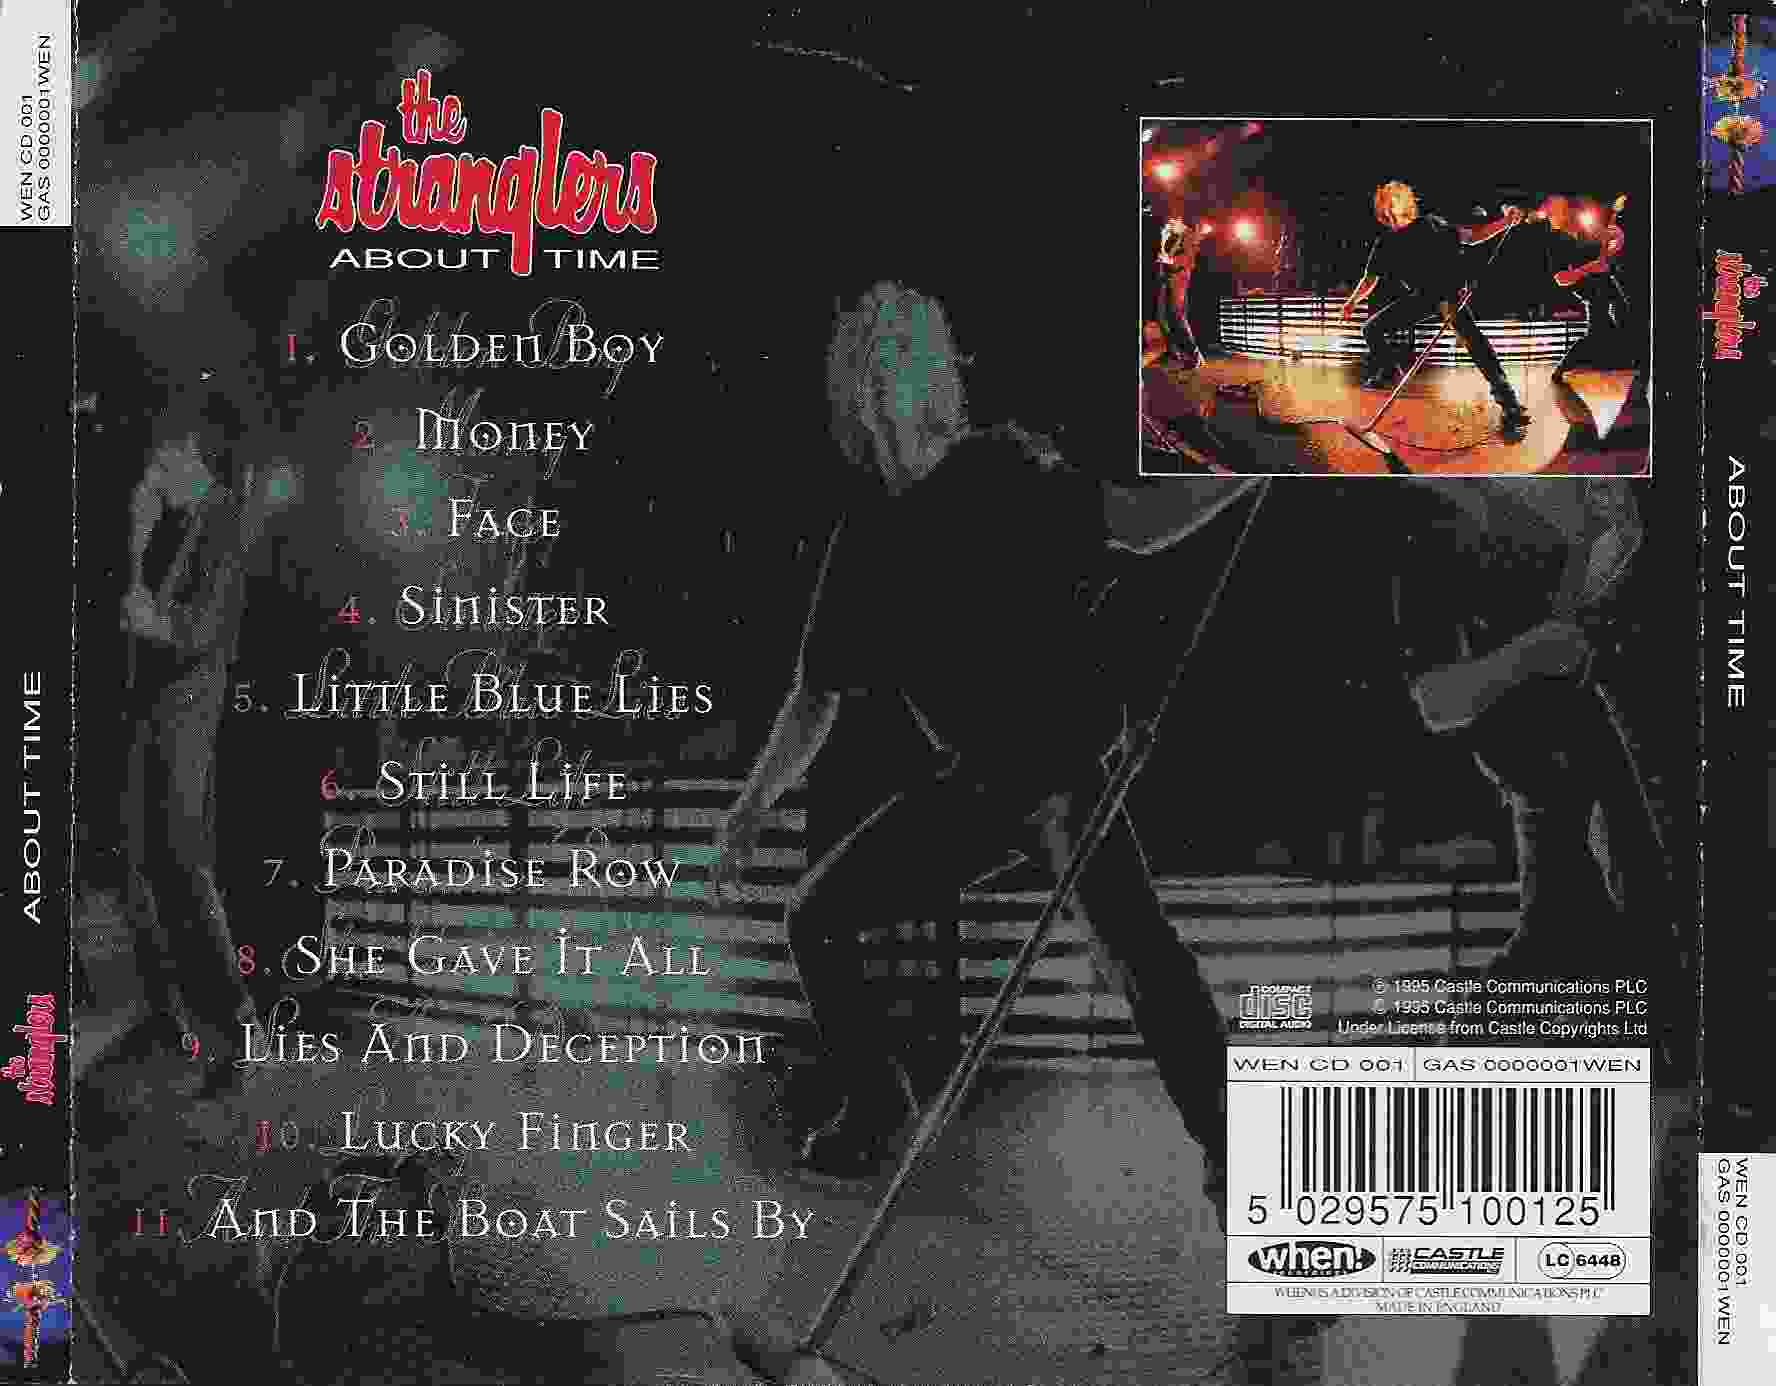 Back cover of WENCD 001